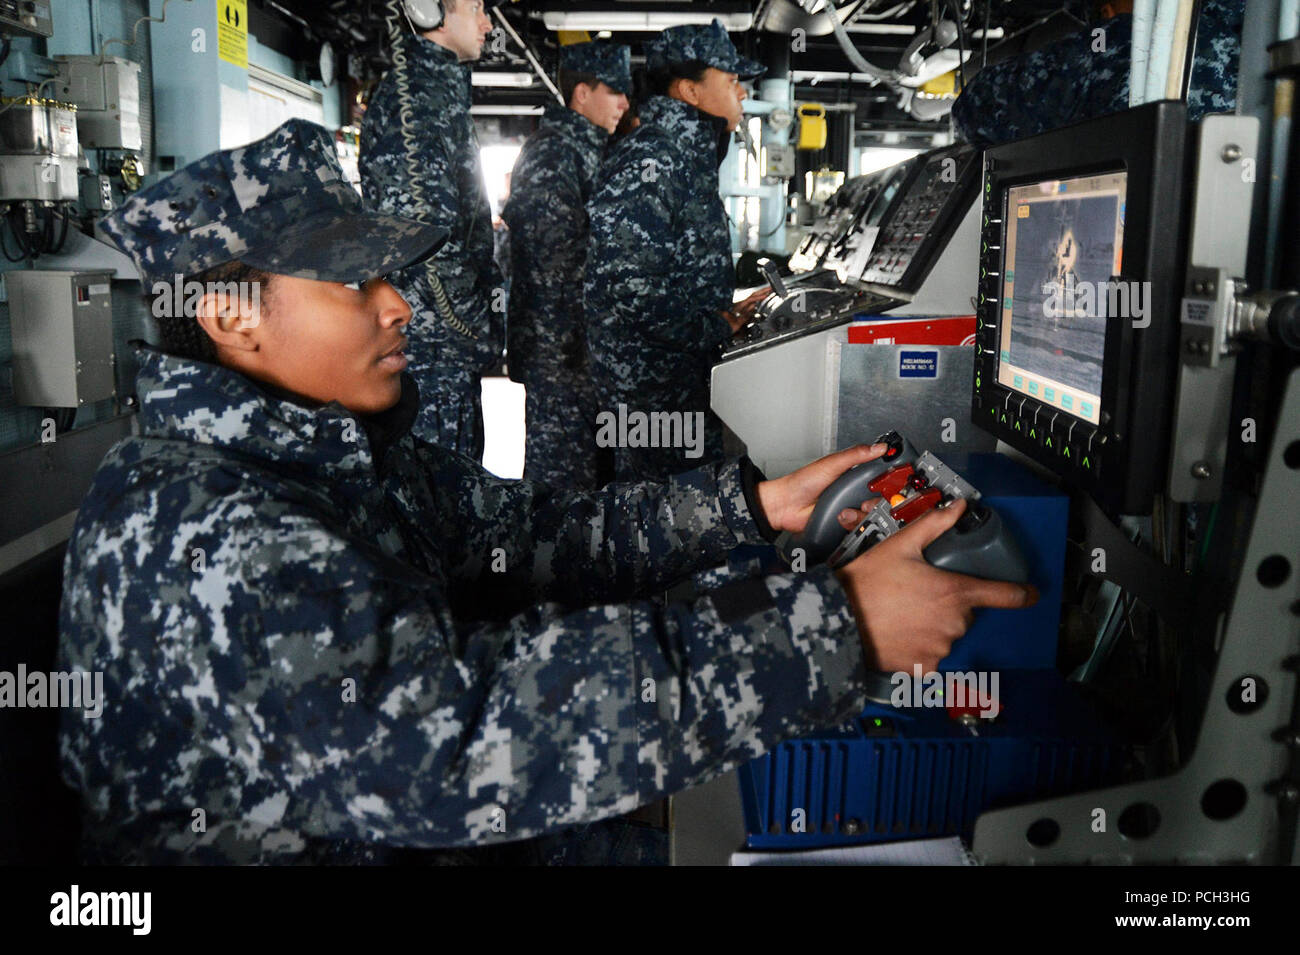 PYEONGTAEK, Republic of Korea (March 18, 2013) Gunner's Mate 3rd Class Akilch Morris monitors surface contacts on the bridge of the Arleigh Burke-class guided-missile destroyer USS McCampbell (DDG 85) as the ship departs Pyeongtaek, Republic of Korea. McCampbell is part of Destroyer Squadron 15, forward deployed to Yokosuka, Japan, and is underway to conduct the bilateral exercise Foal Eagle 2013 with allied nation Republic of Korea in support of regional security and stability of the Indo-Asia-Pacific region. Stock Photo